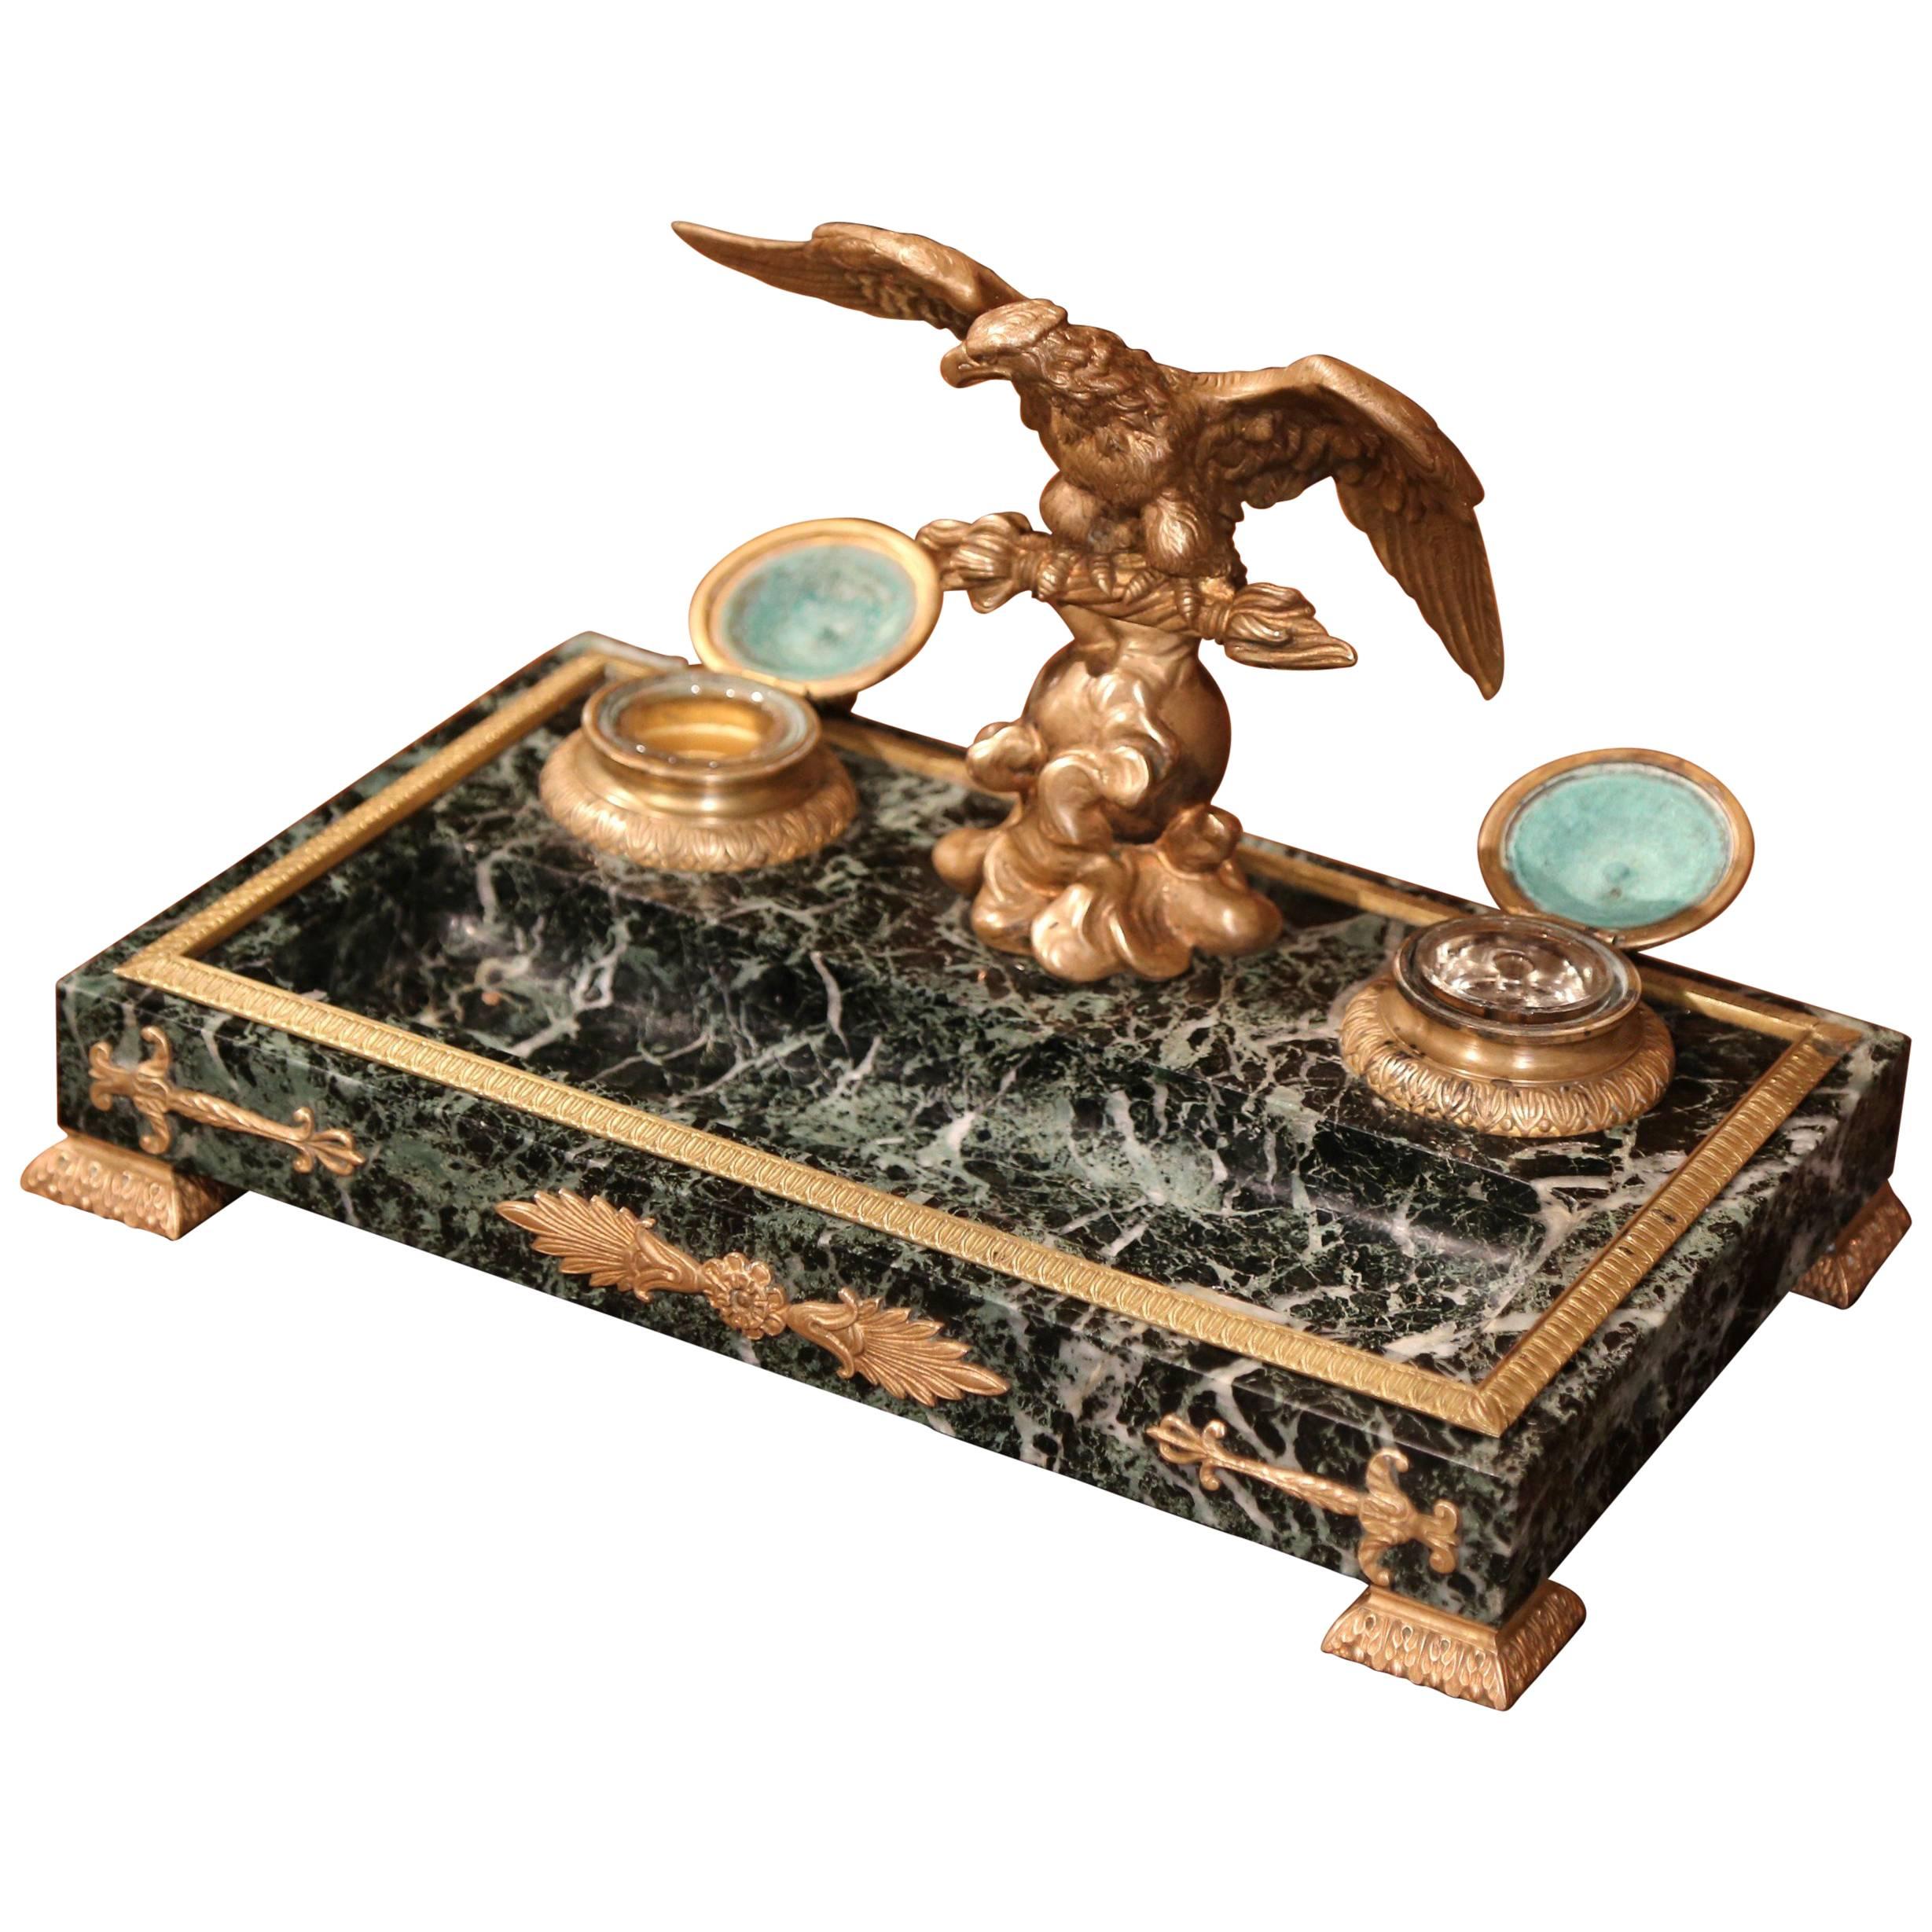 Decorate your desk or study with this elegant inkwell. Crafted in France, circa 1920, the antique desk accessory on dark green marble base features a bronze eagle standing on a tree branch, two round glass ink containers inside their bronze holders